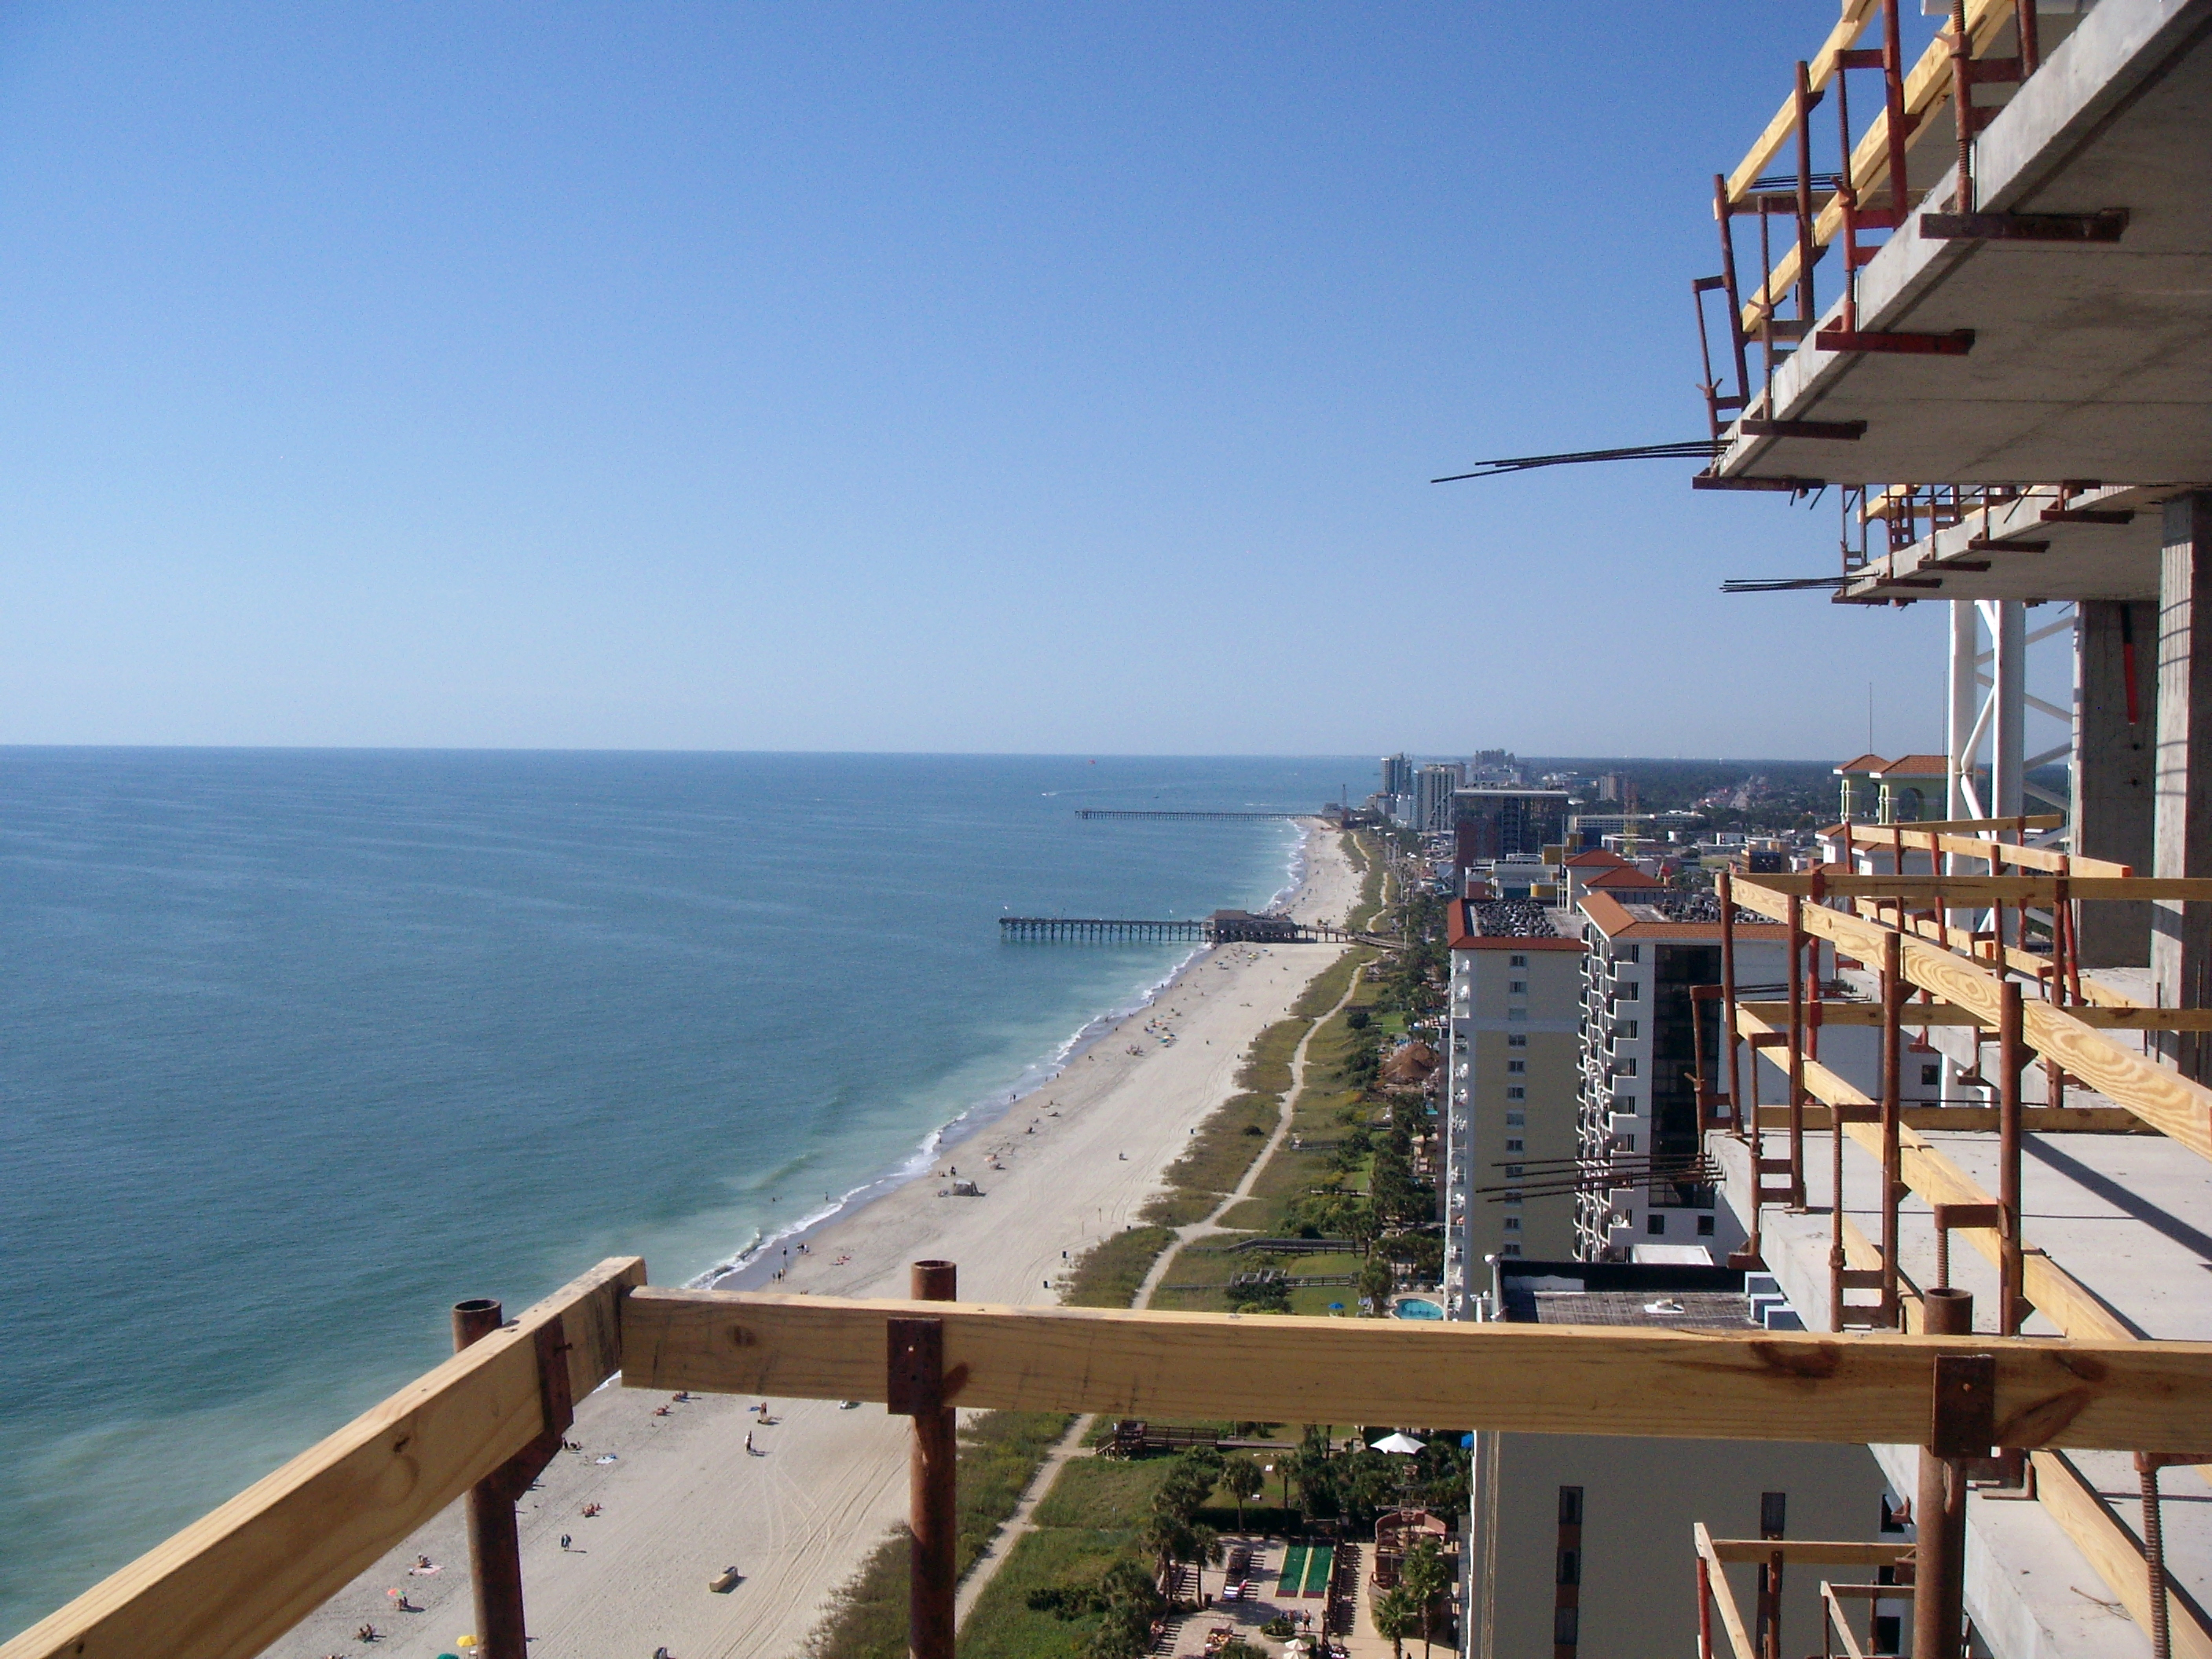 Landmark Builders announces official Topping Out in Myrtle Beach, South Carolina